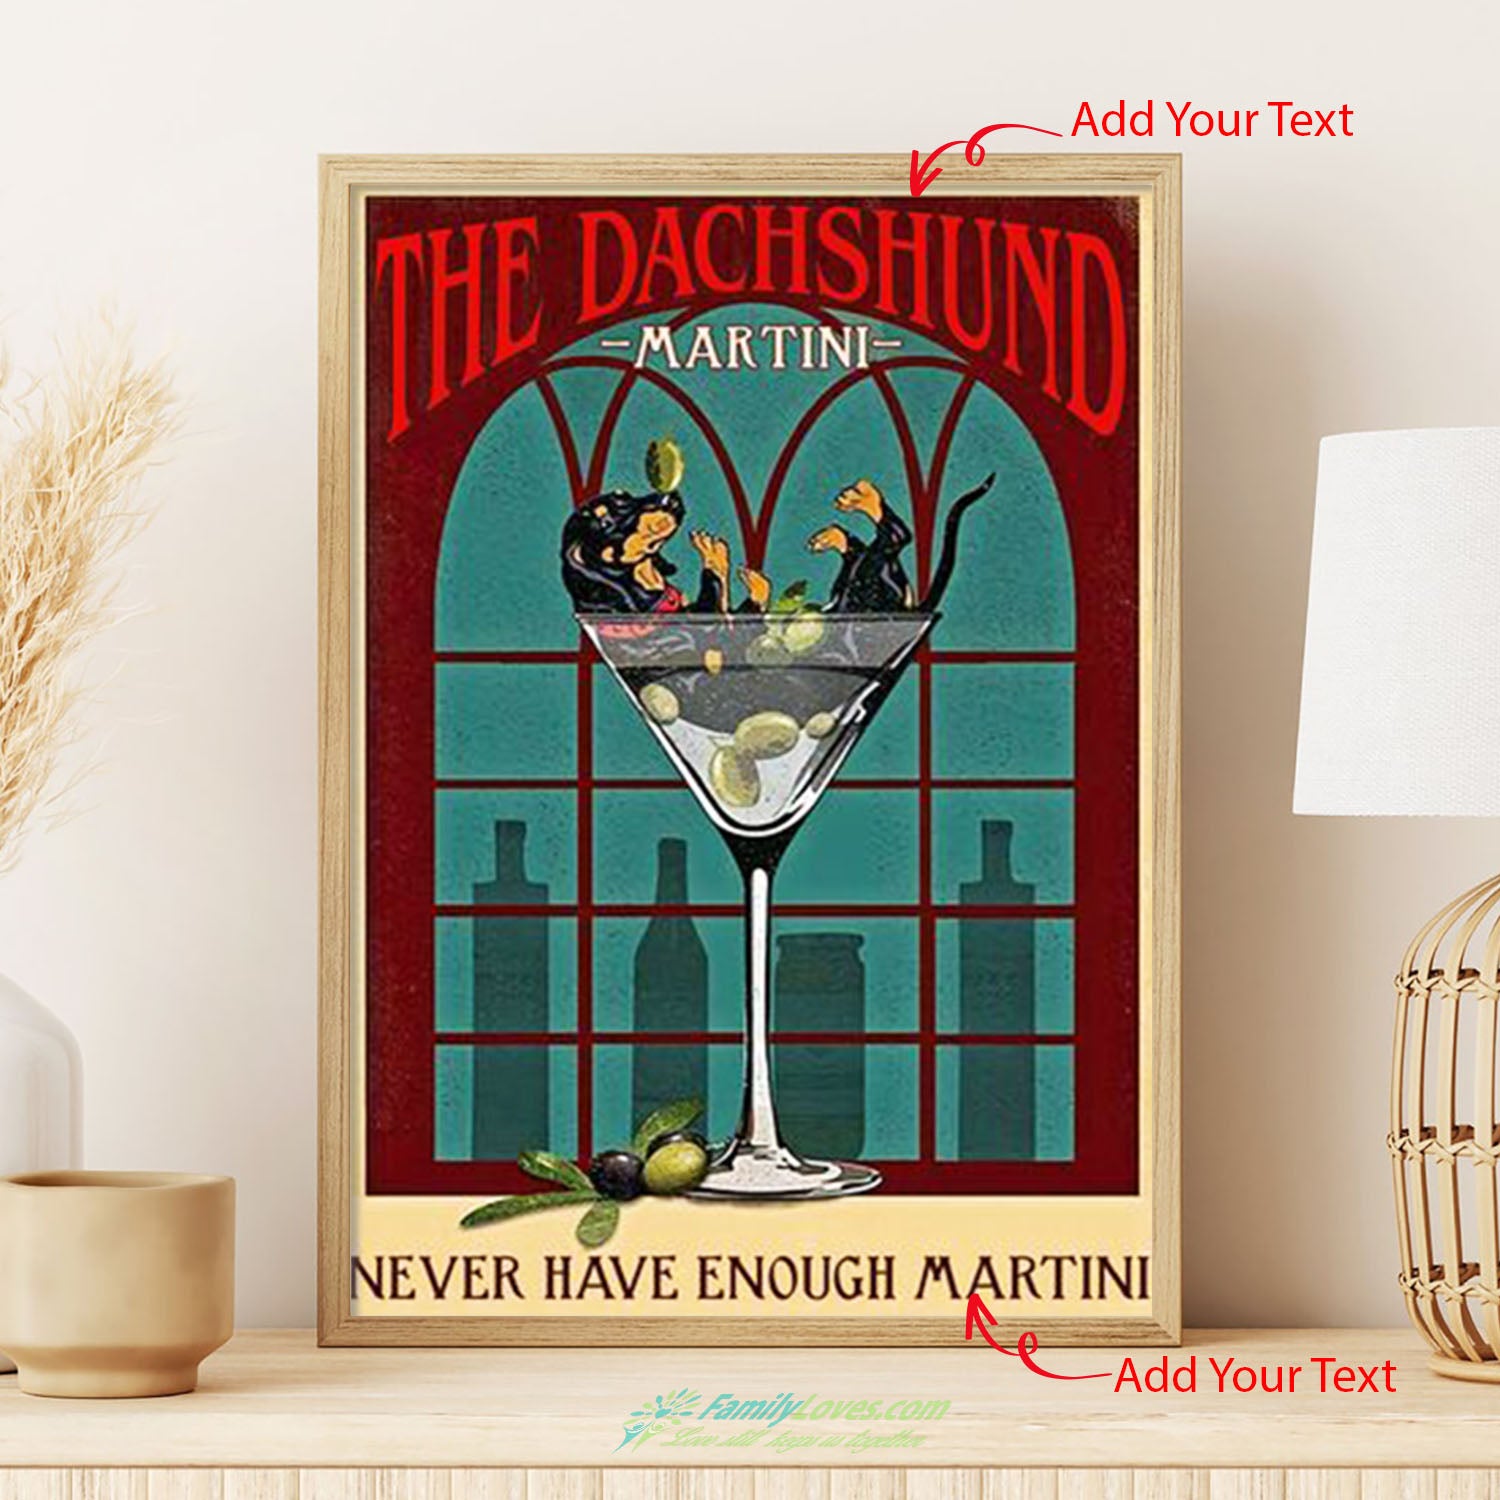 The Dachshund Martini Never Have Enough Martini Canvas Frame Poster Wall Decor All Size 1